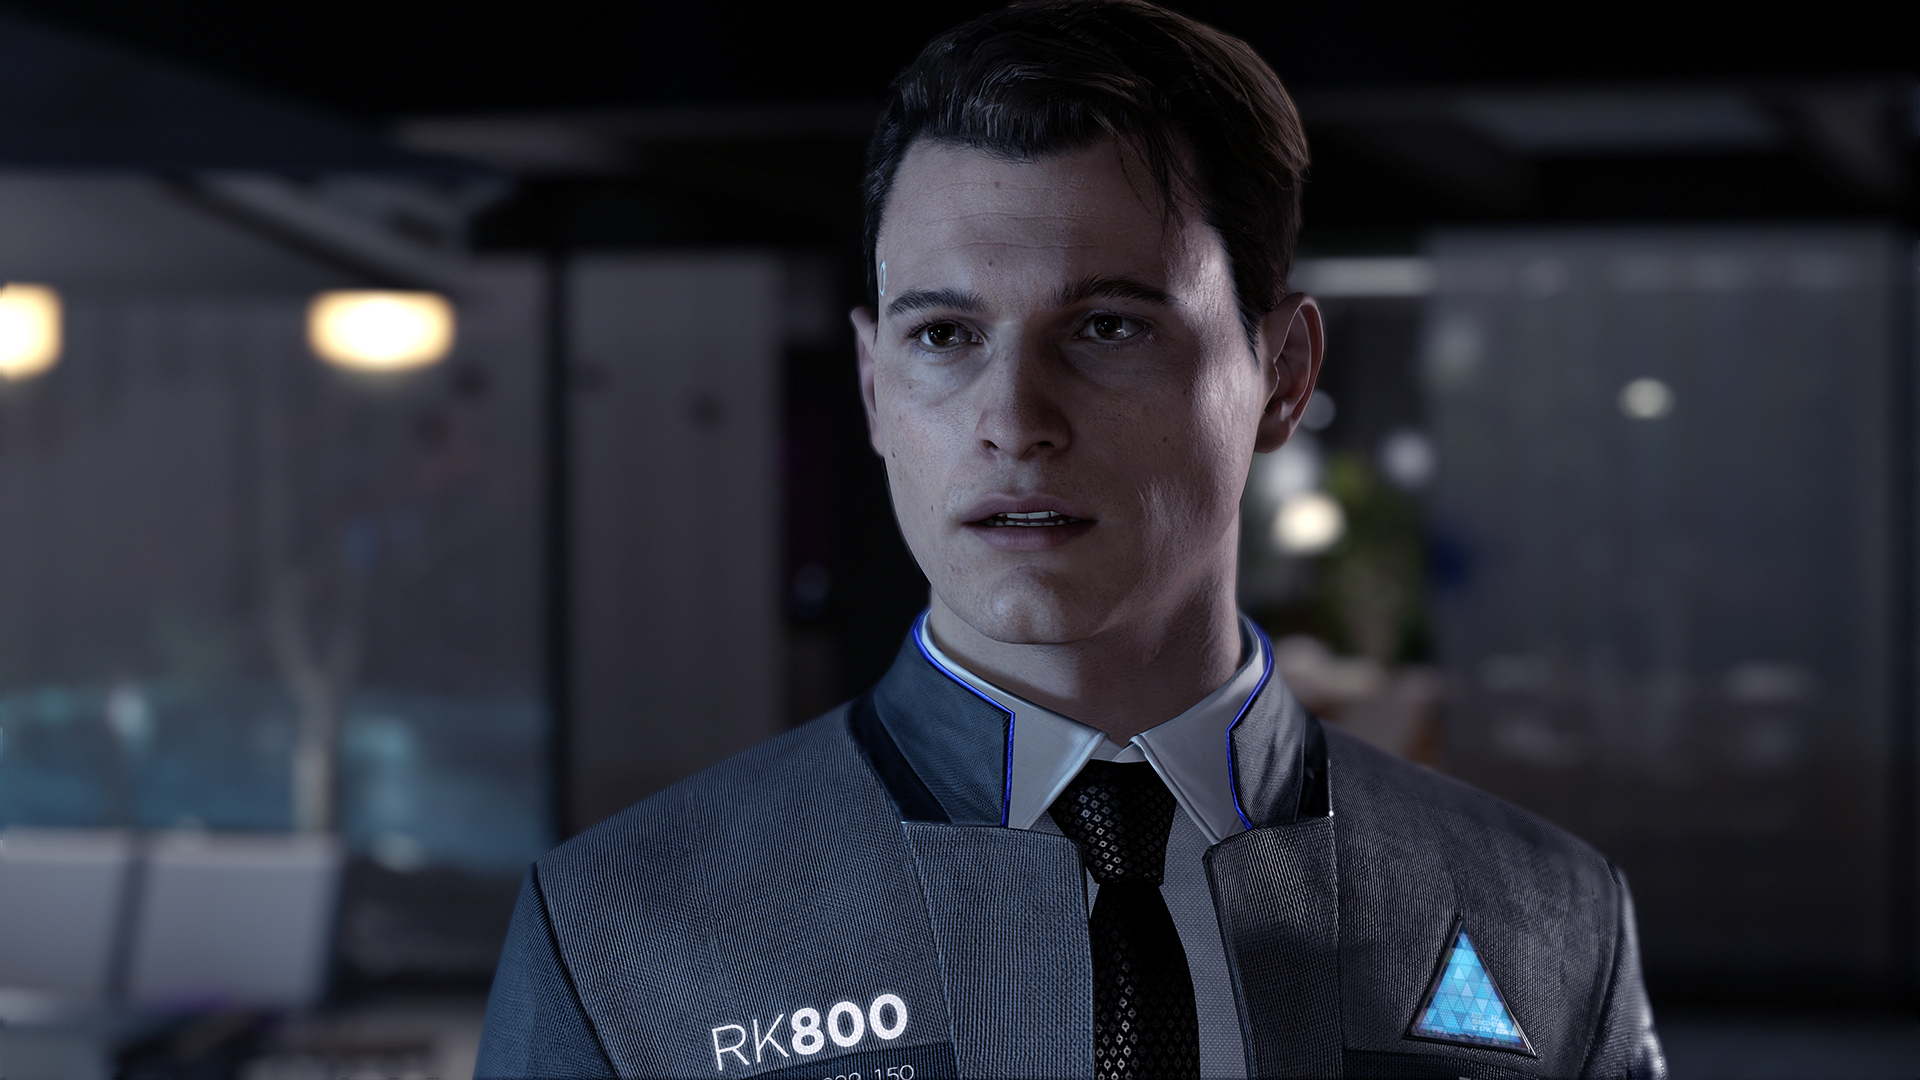 detroit become human ps5 outfit｜TikTok Search